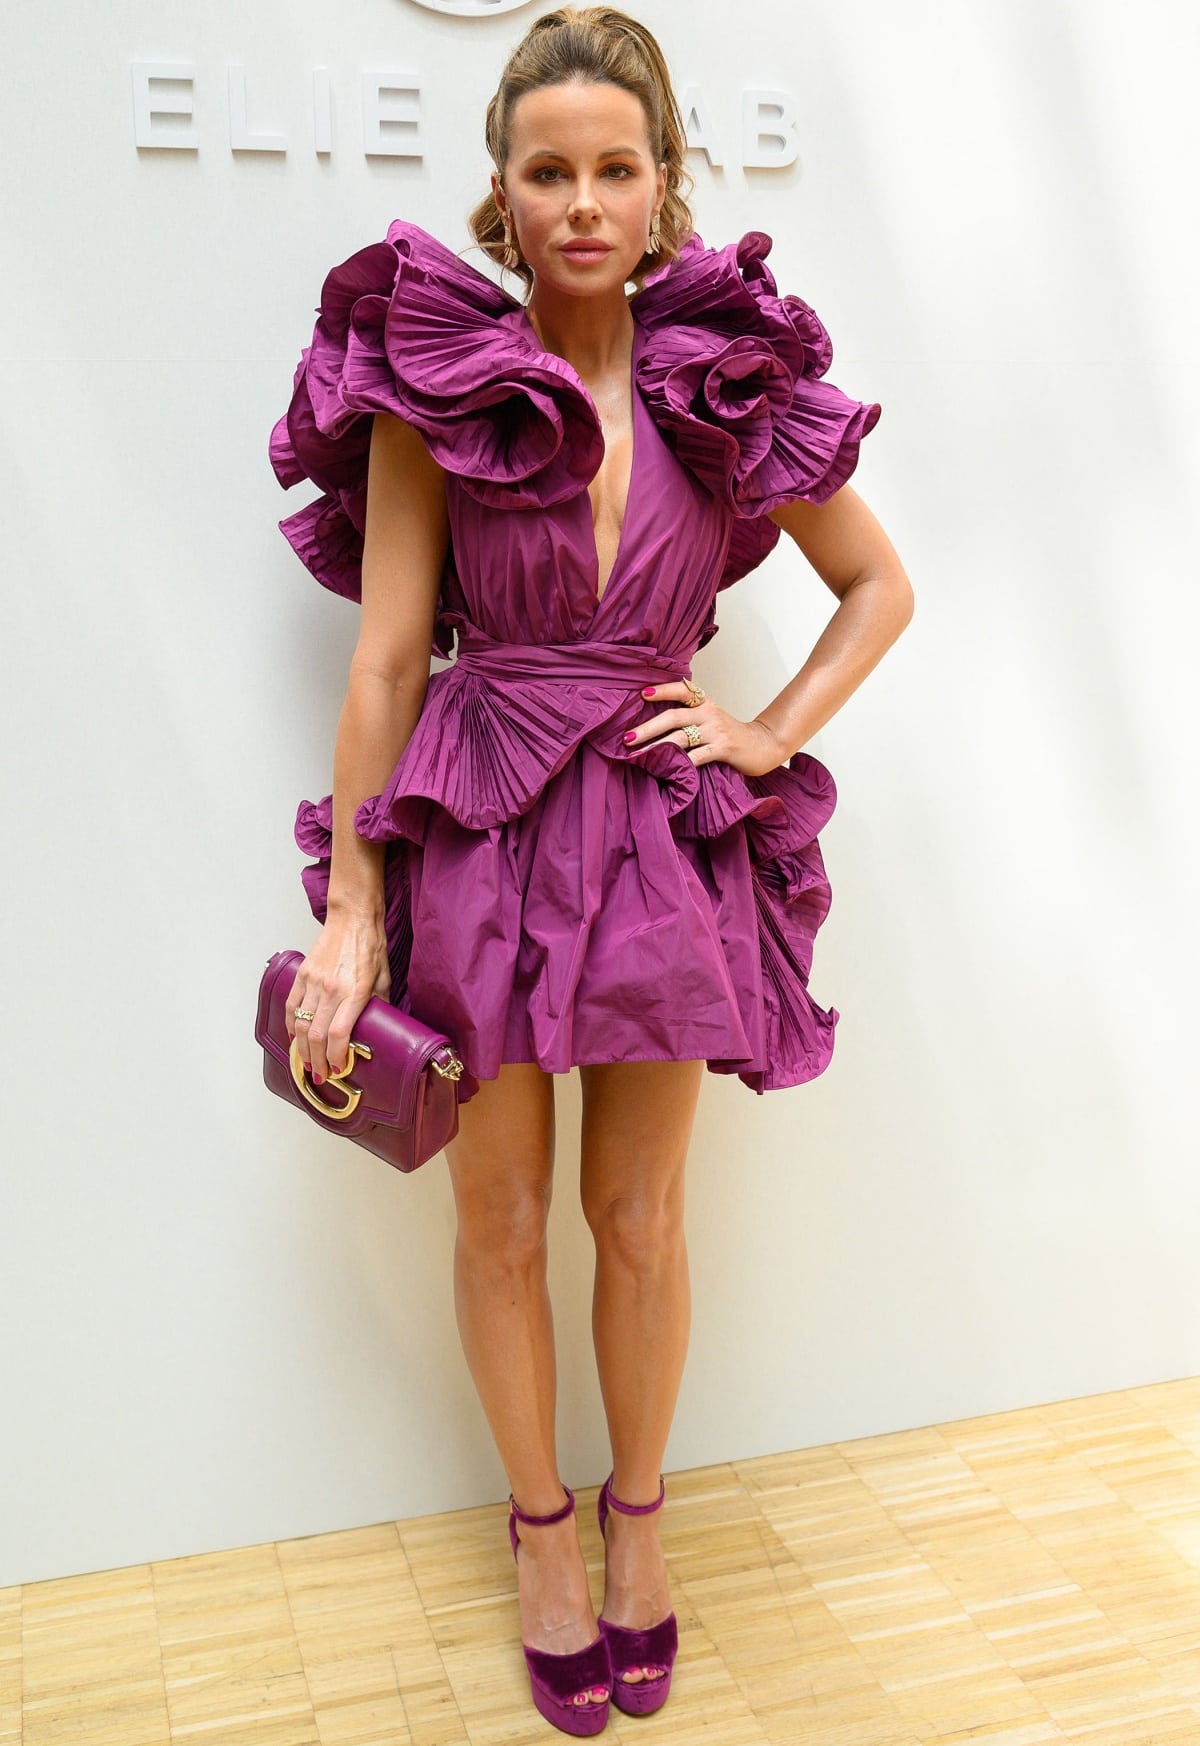 Kate Beckinsale wearing an all-purple Fall 2022 look at the Elie Saab Haute Couture show